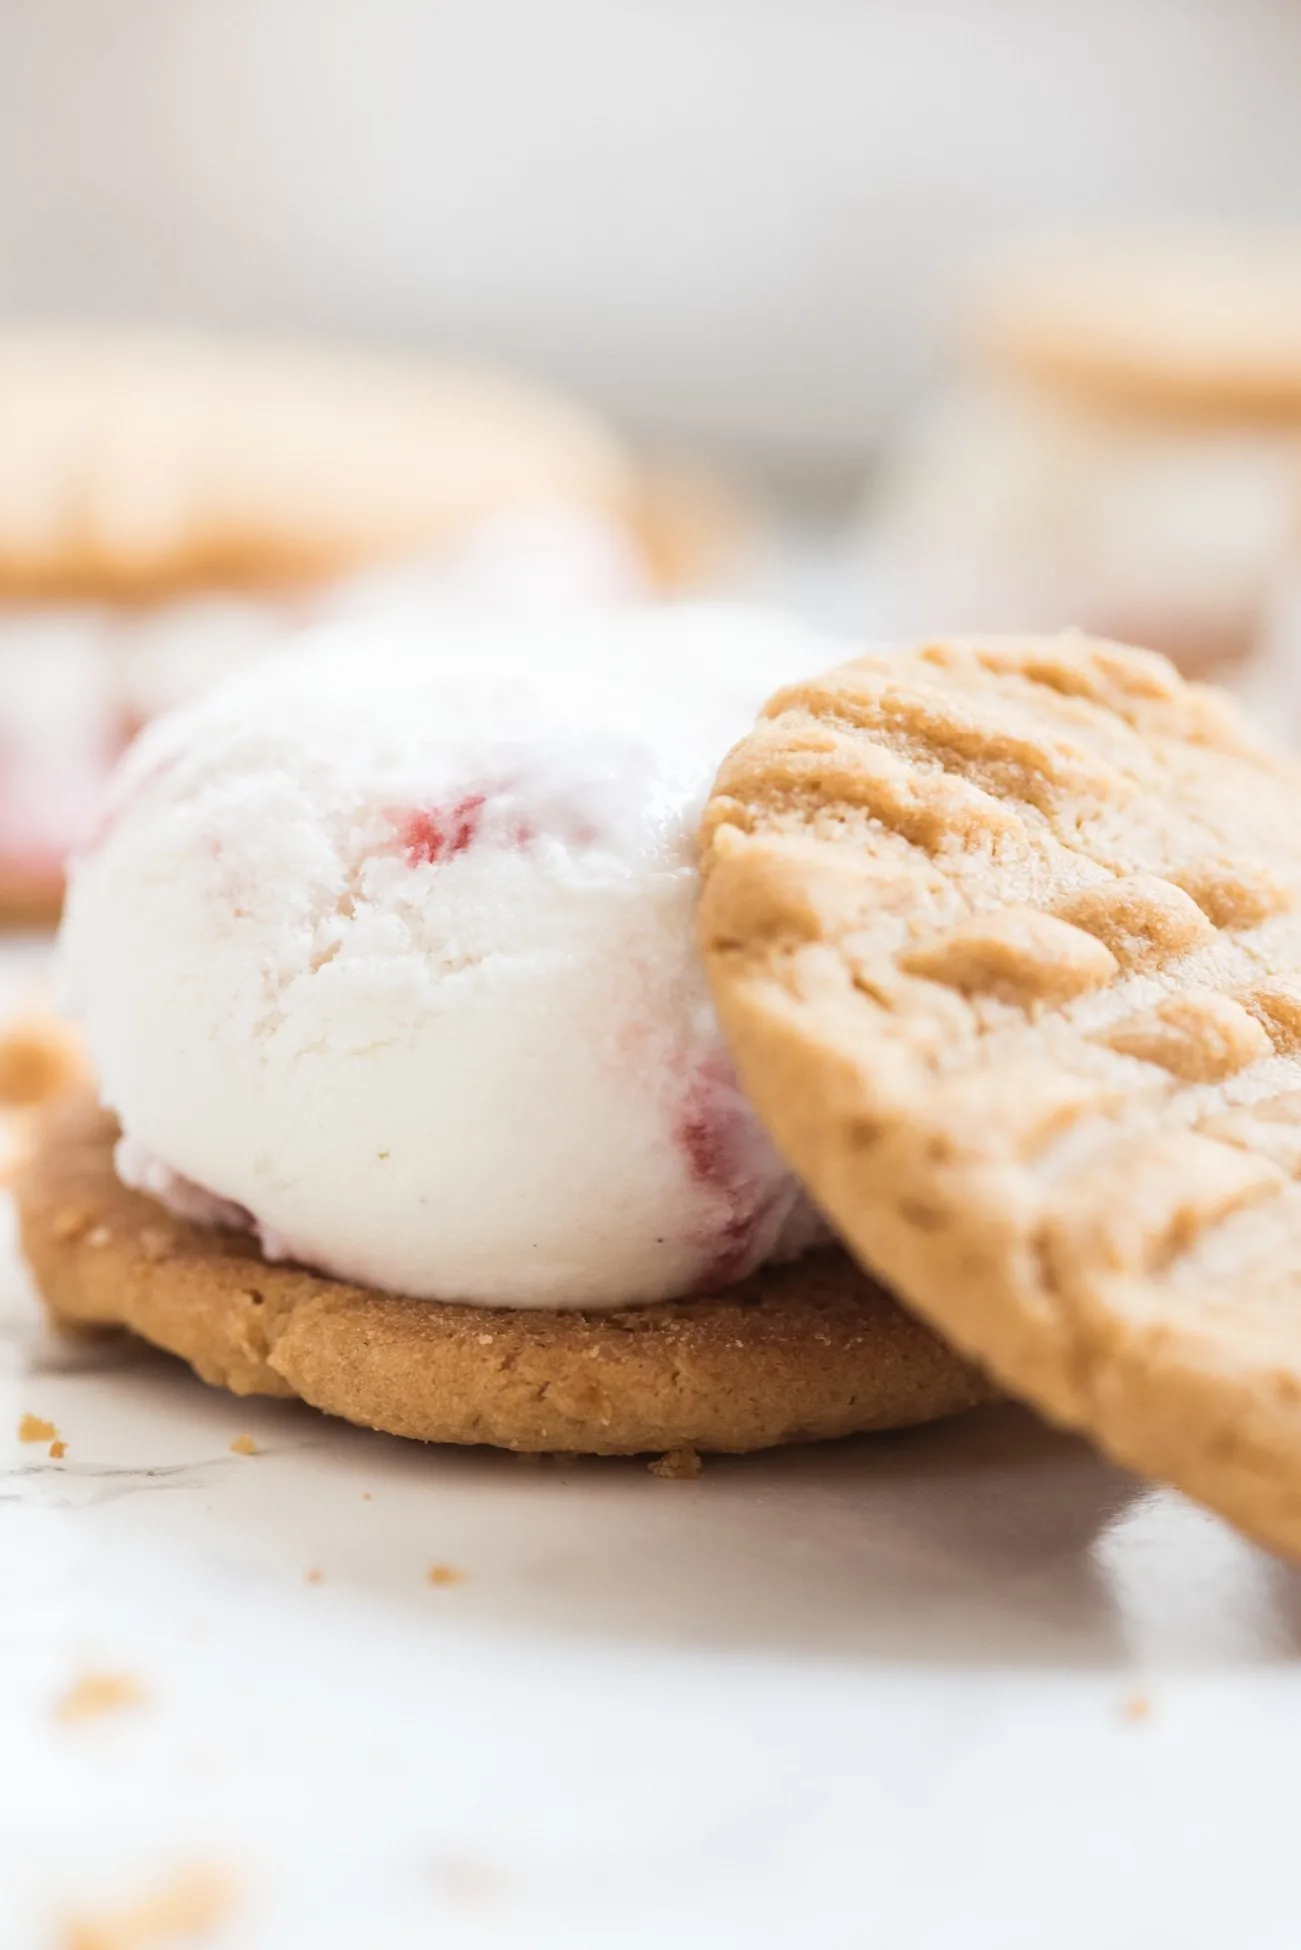 Peanut Butter + Jelly Ice Cream Sandwiches | Summer desserts, homemade ice cream sandwiches, entertaining tips, party ideas and more from @cydconverse